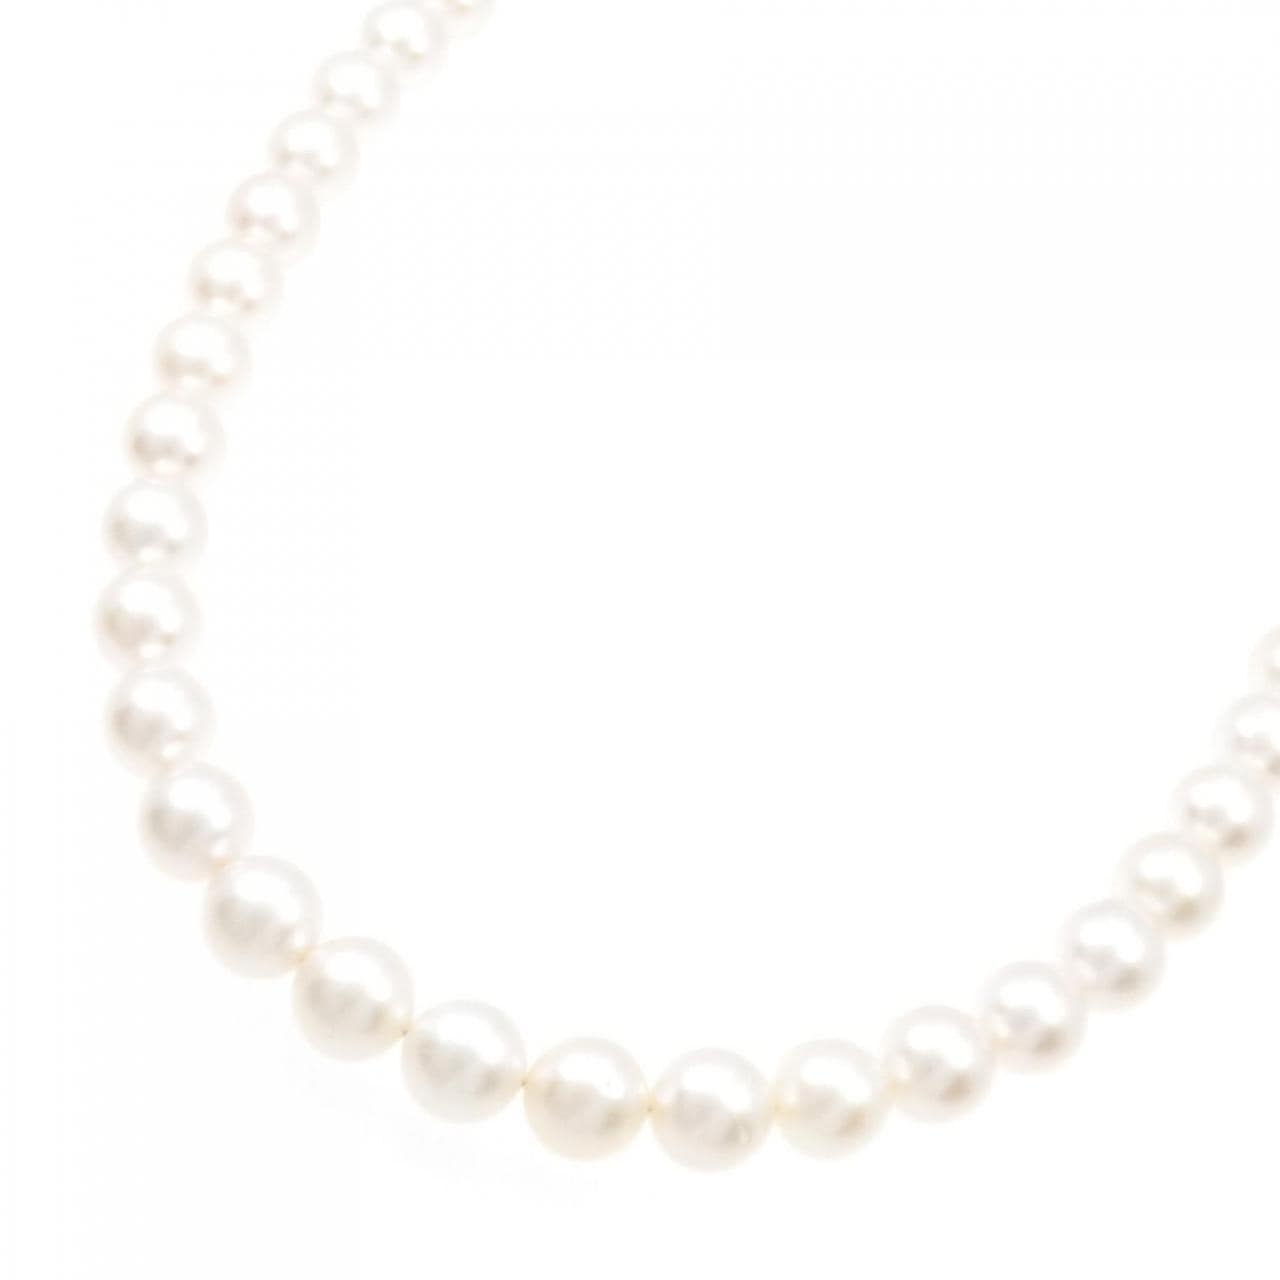 [BRAND NEW] Silver Clasp Akoya Pearl Necklace 9-9.5mm